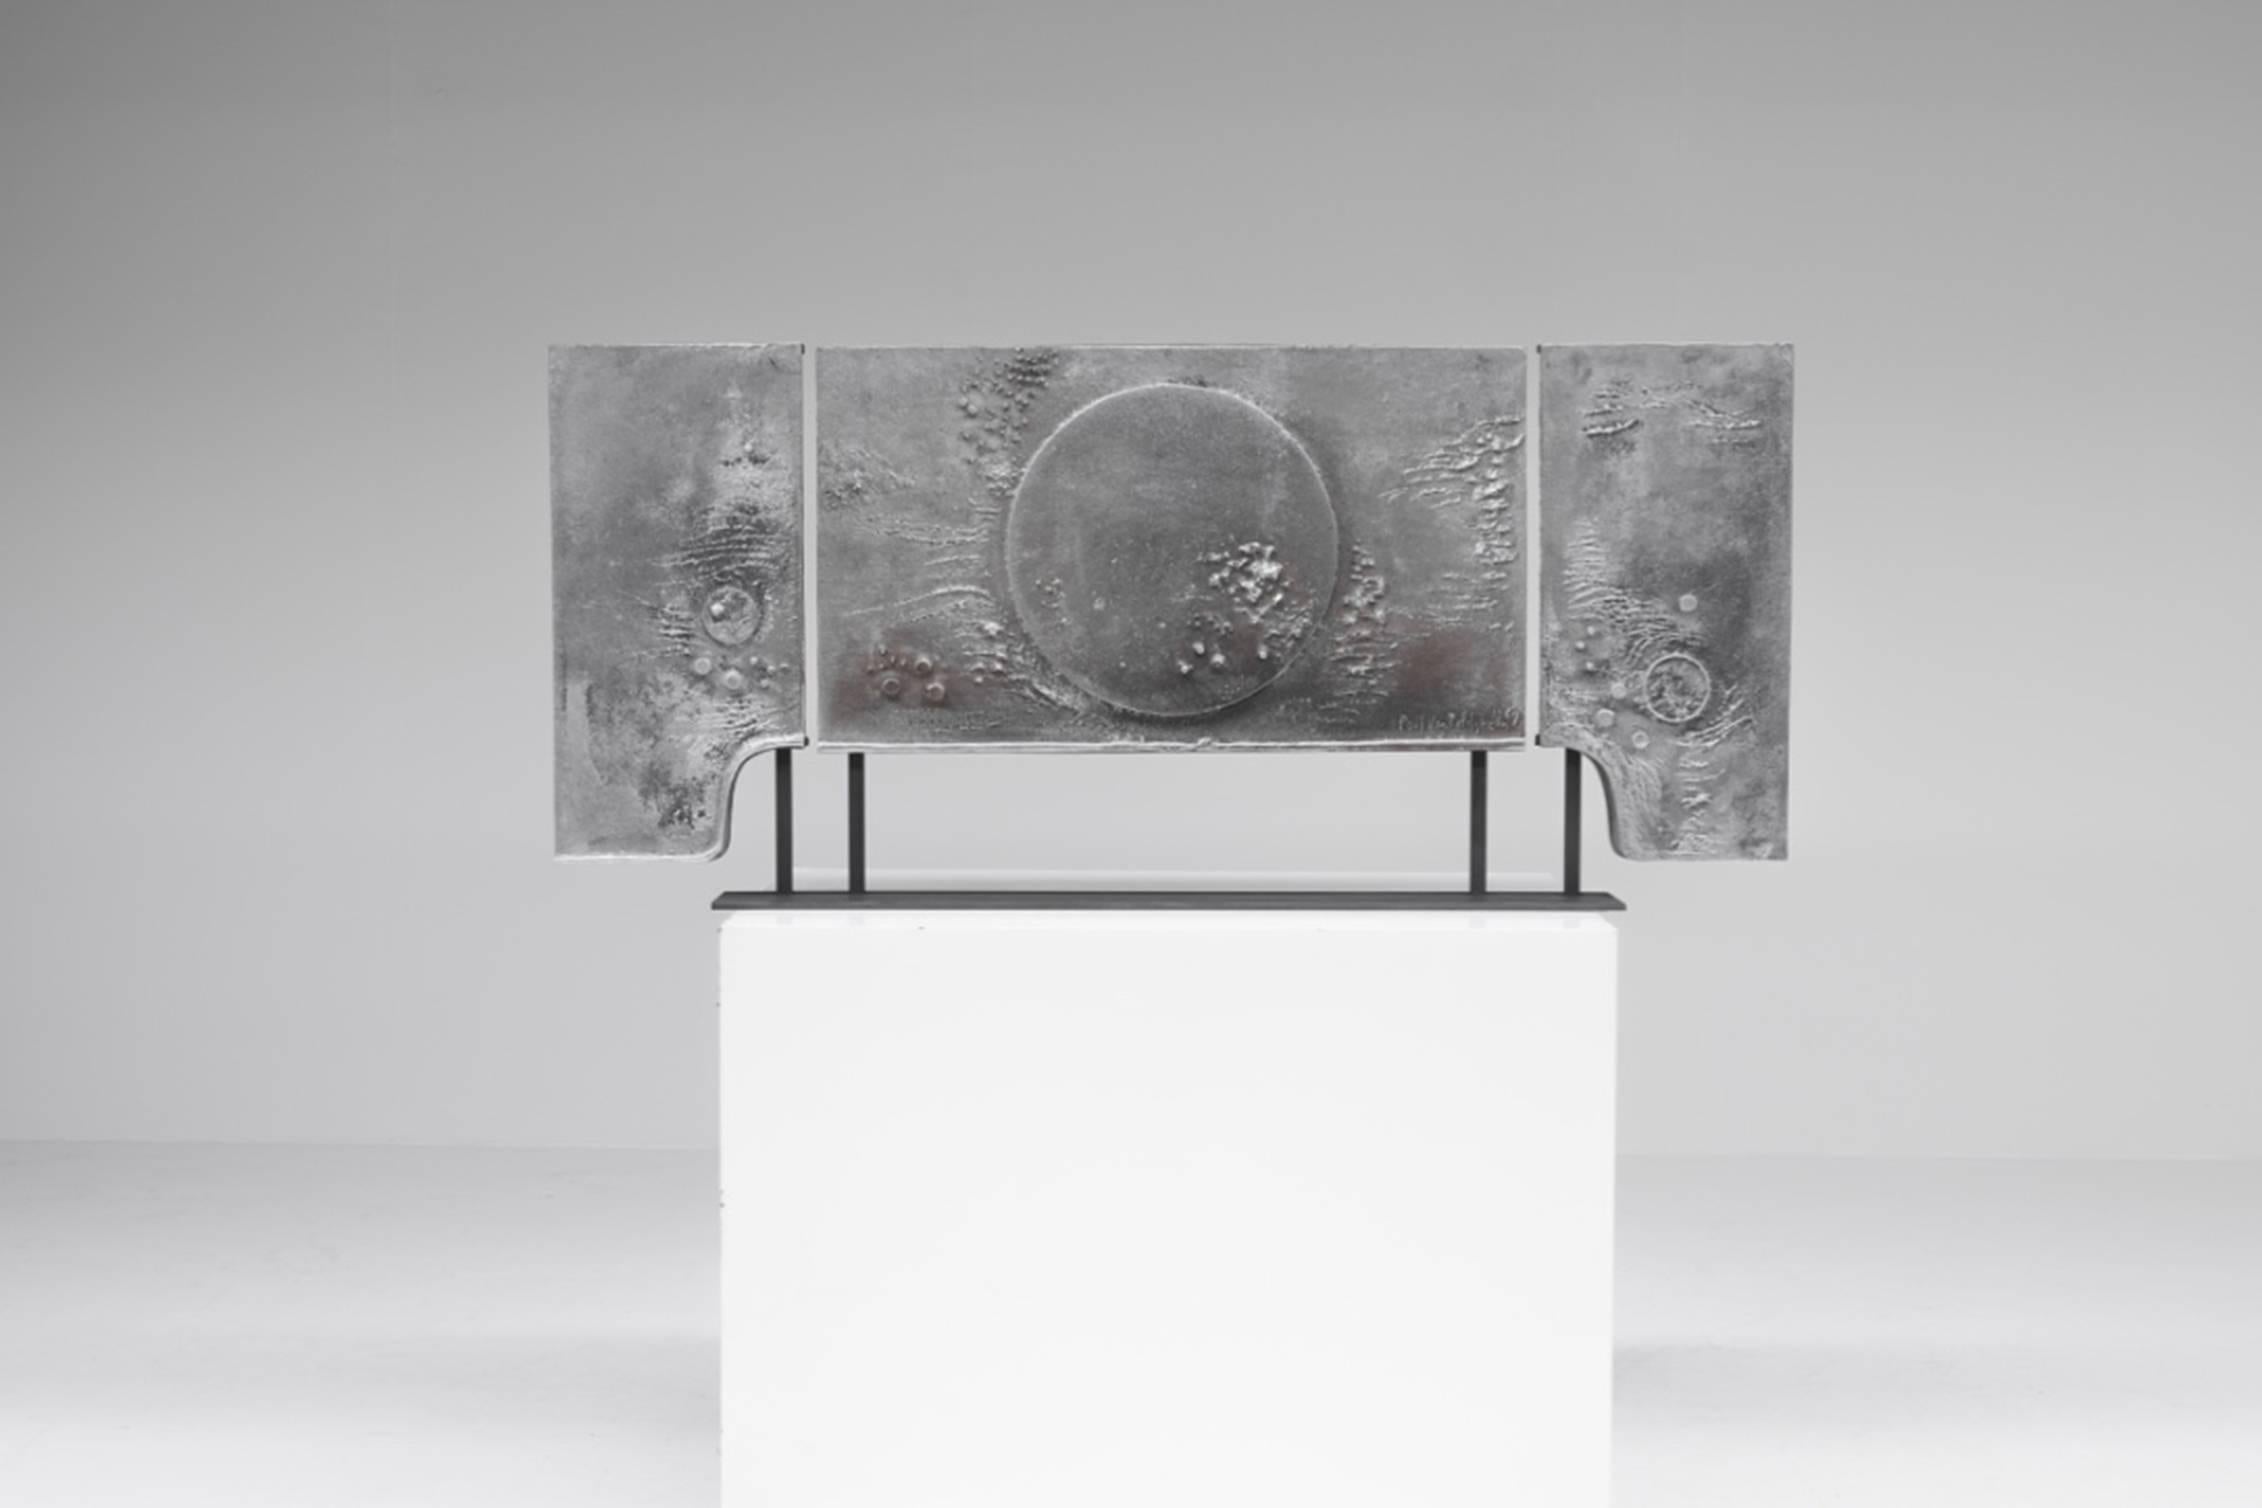 Cast aluminum mantelpiece triptych, mounted on a socle by artist Paul van Rafelghem, signed 1969, Courtois, Belgium.

An abstract, interstellar image is depicted in the casted relief. 

